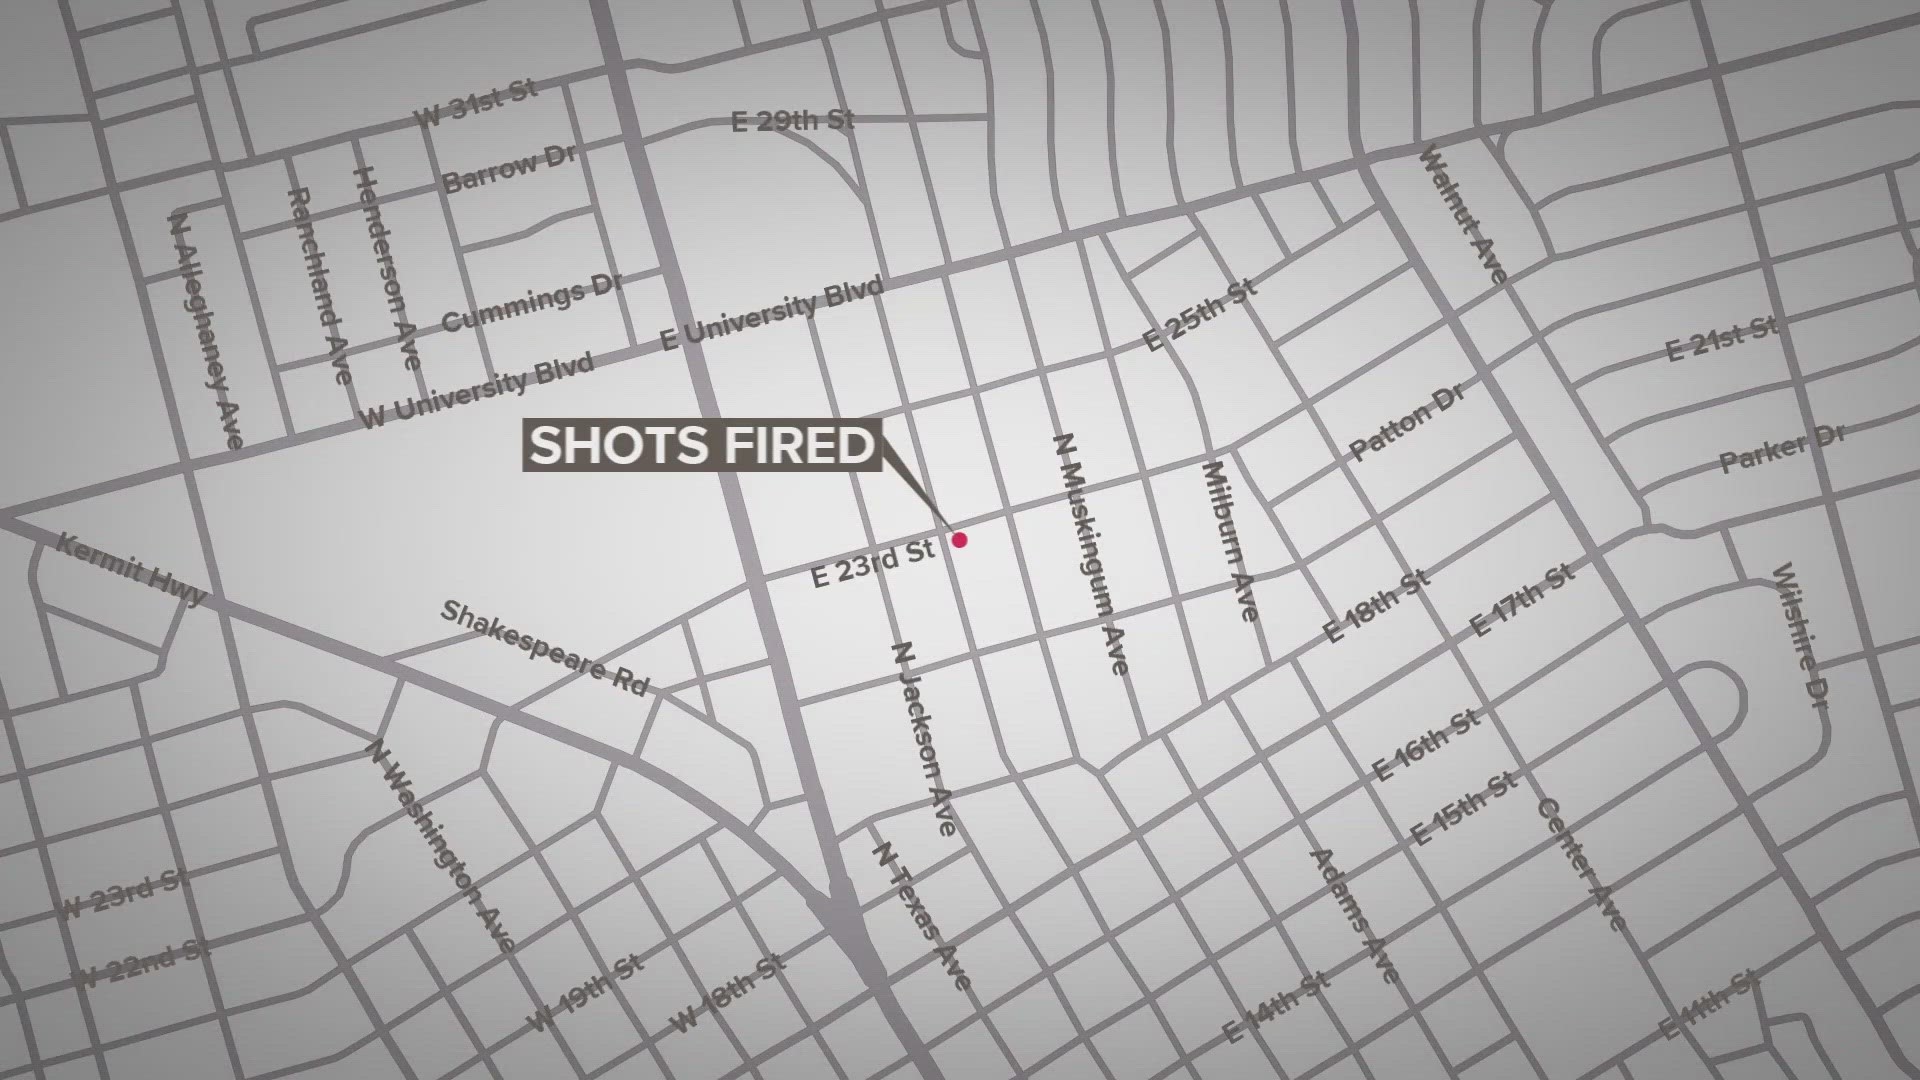 Unknown suspects allegedly fired several rounds at a 21-year-old in the 400 block of E. 23rd St. and fled in a gray Ford Explorer.